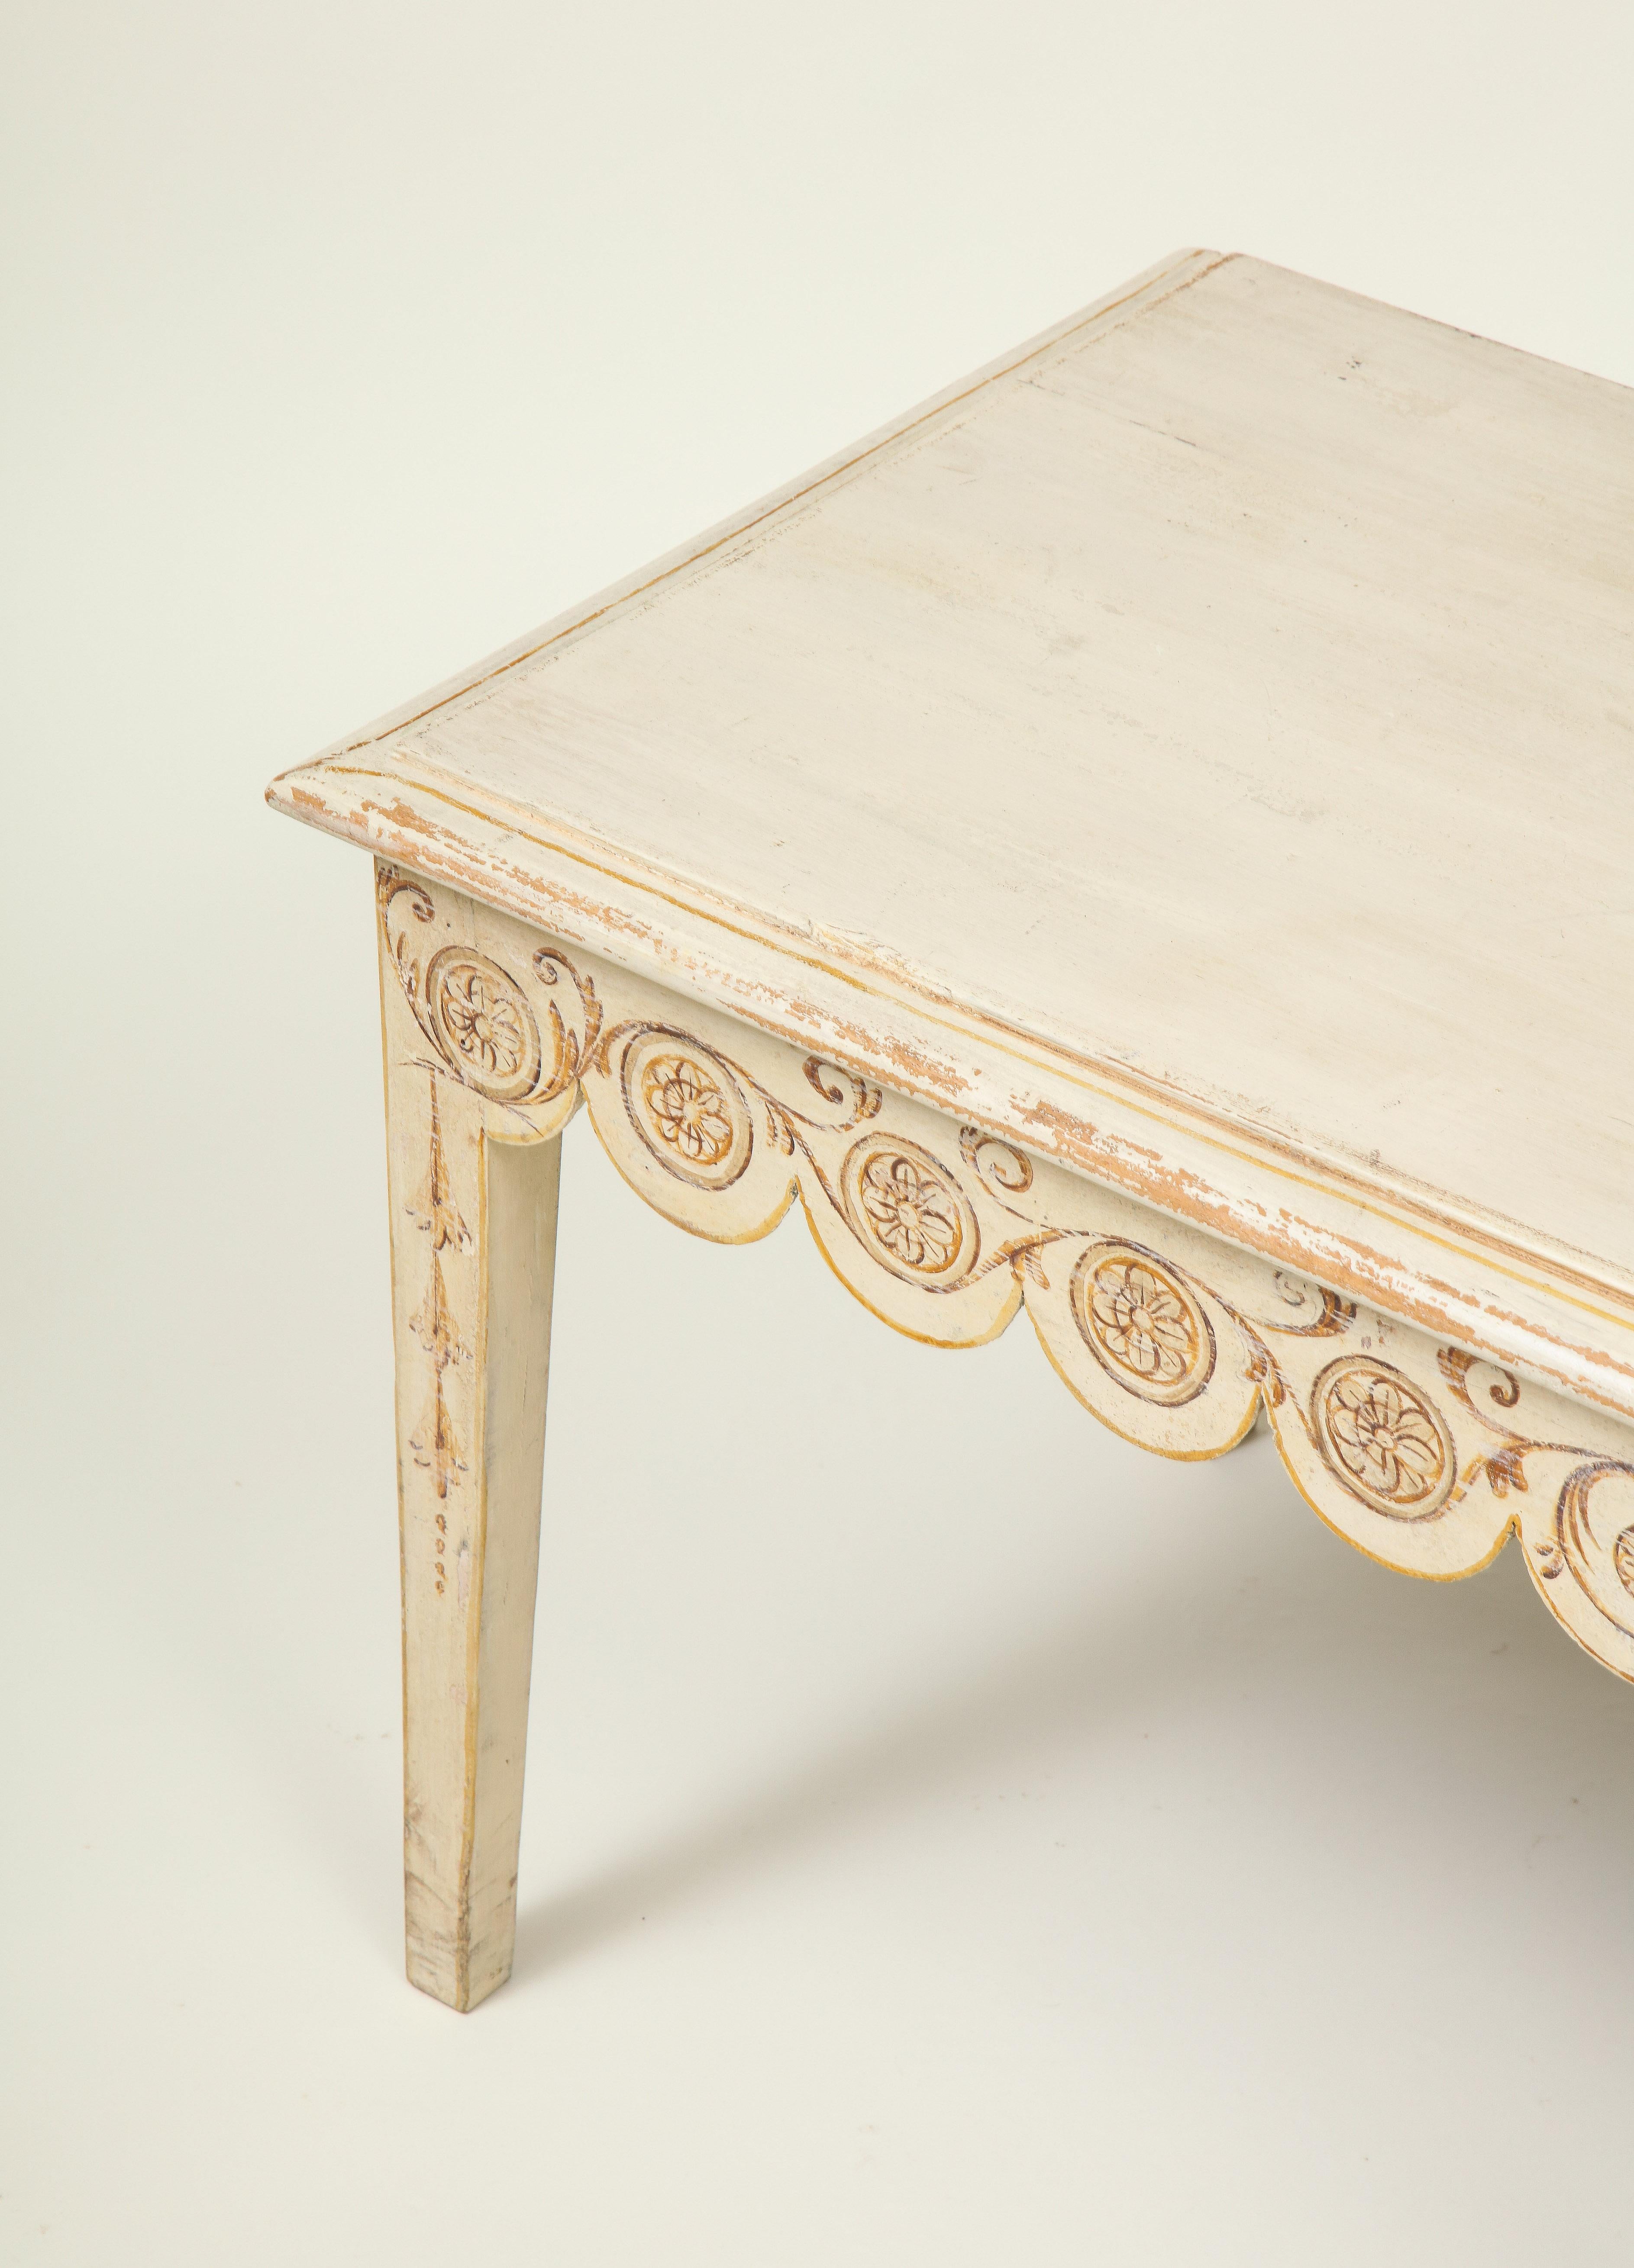 20th Century Long Ivory-Painted Hall Bench